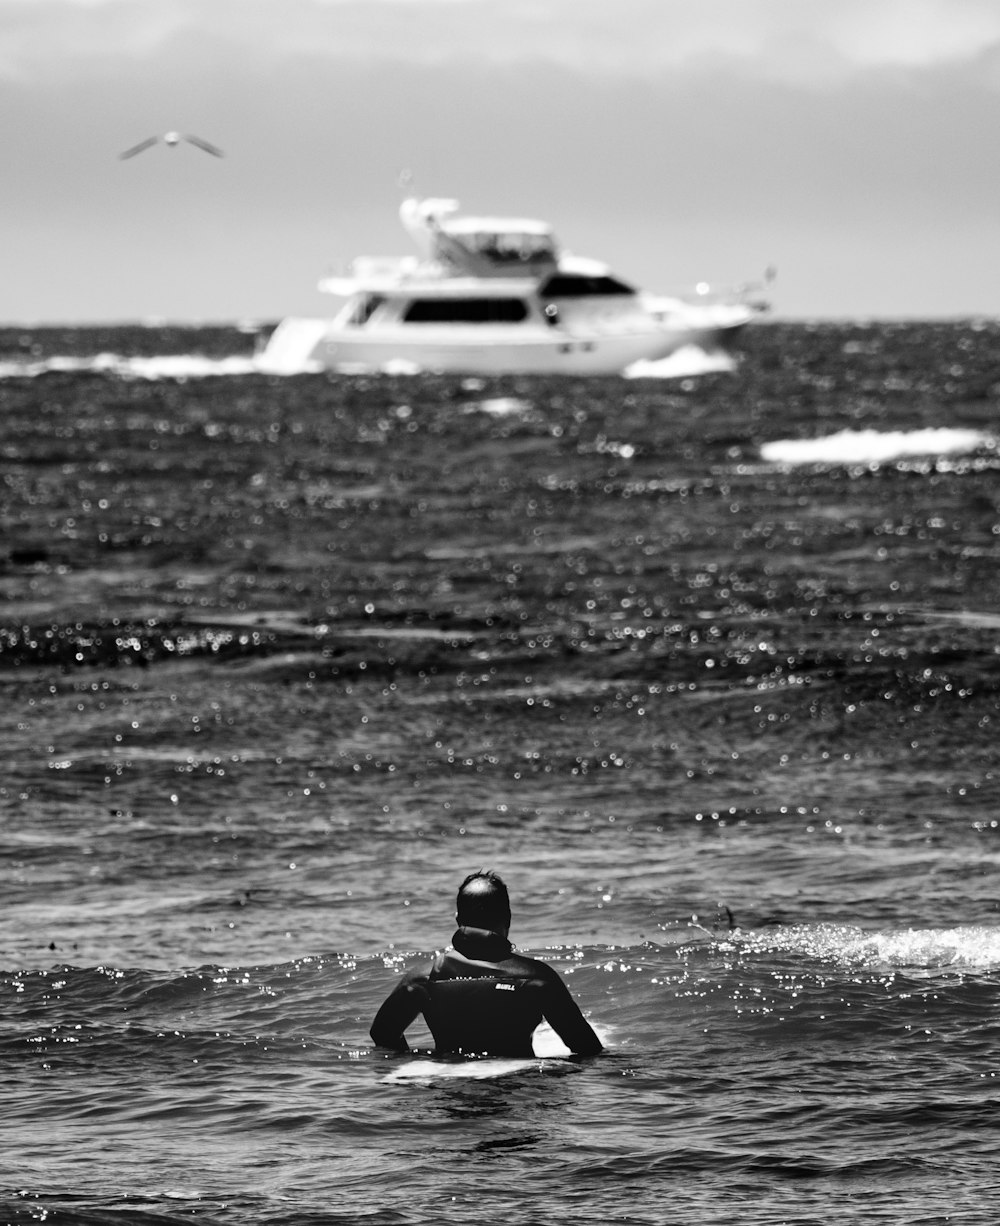 a person in the water with a plane in the background